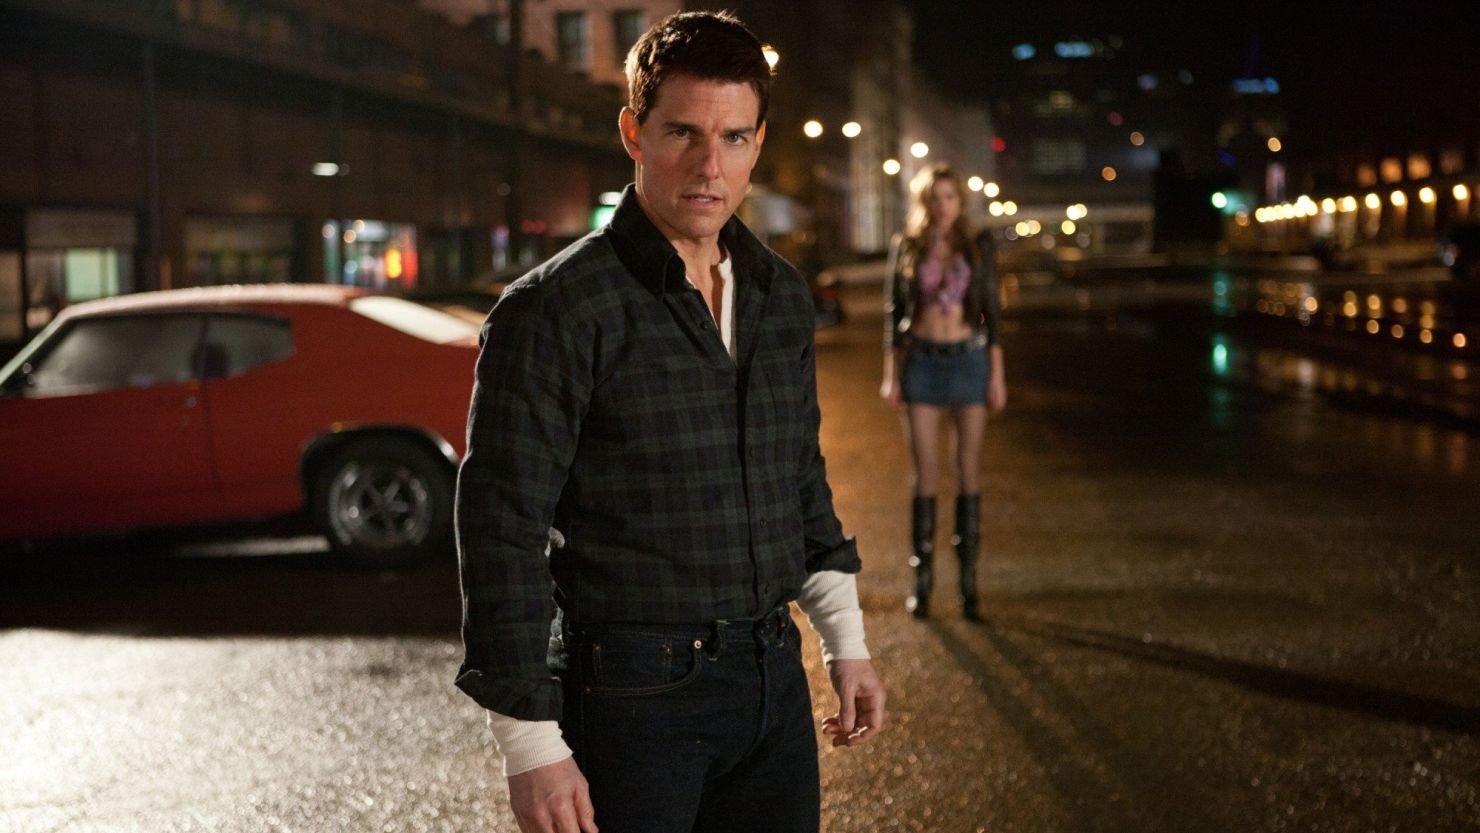 Tom Cruise stars as Jack Reacher in the film of the same name.
